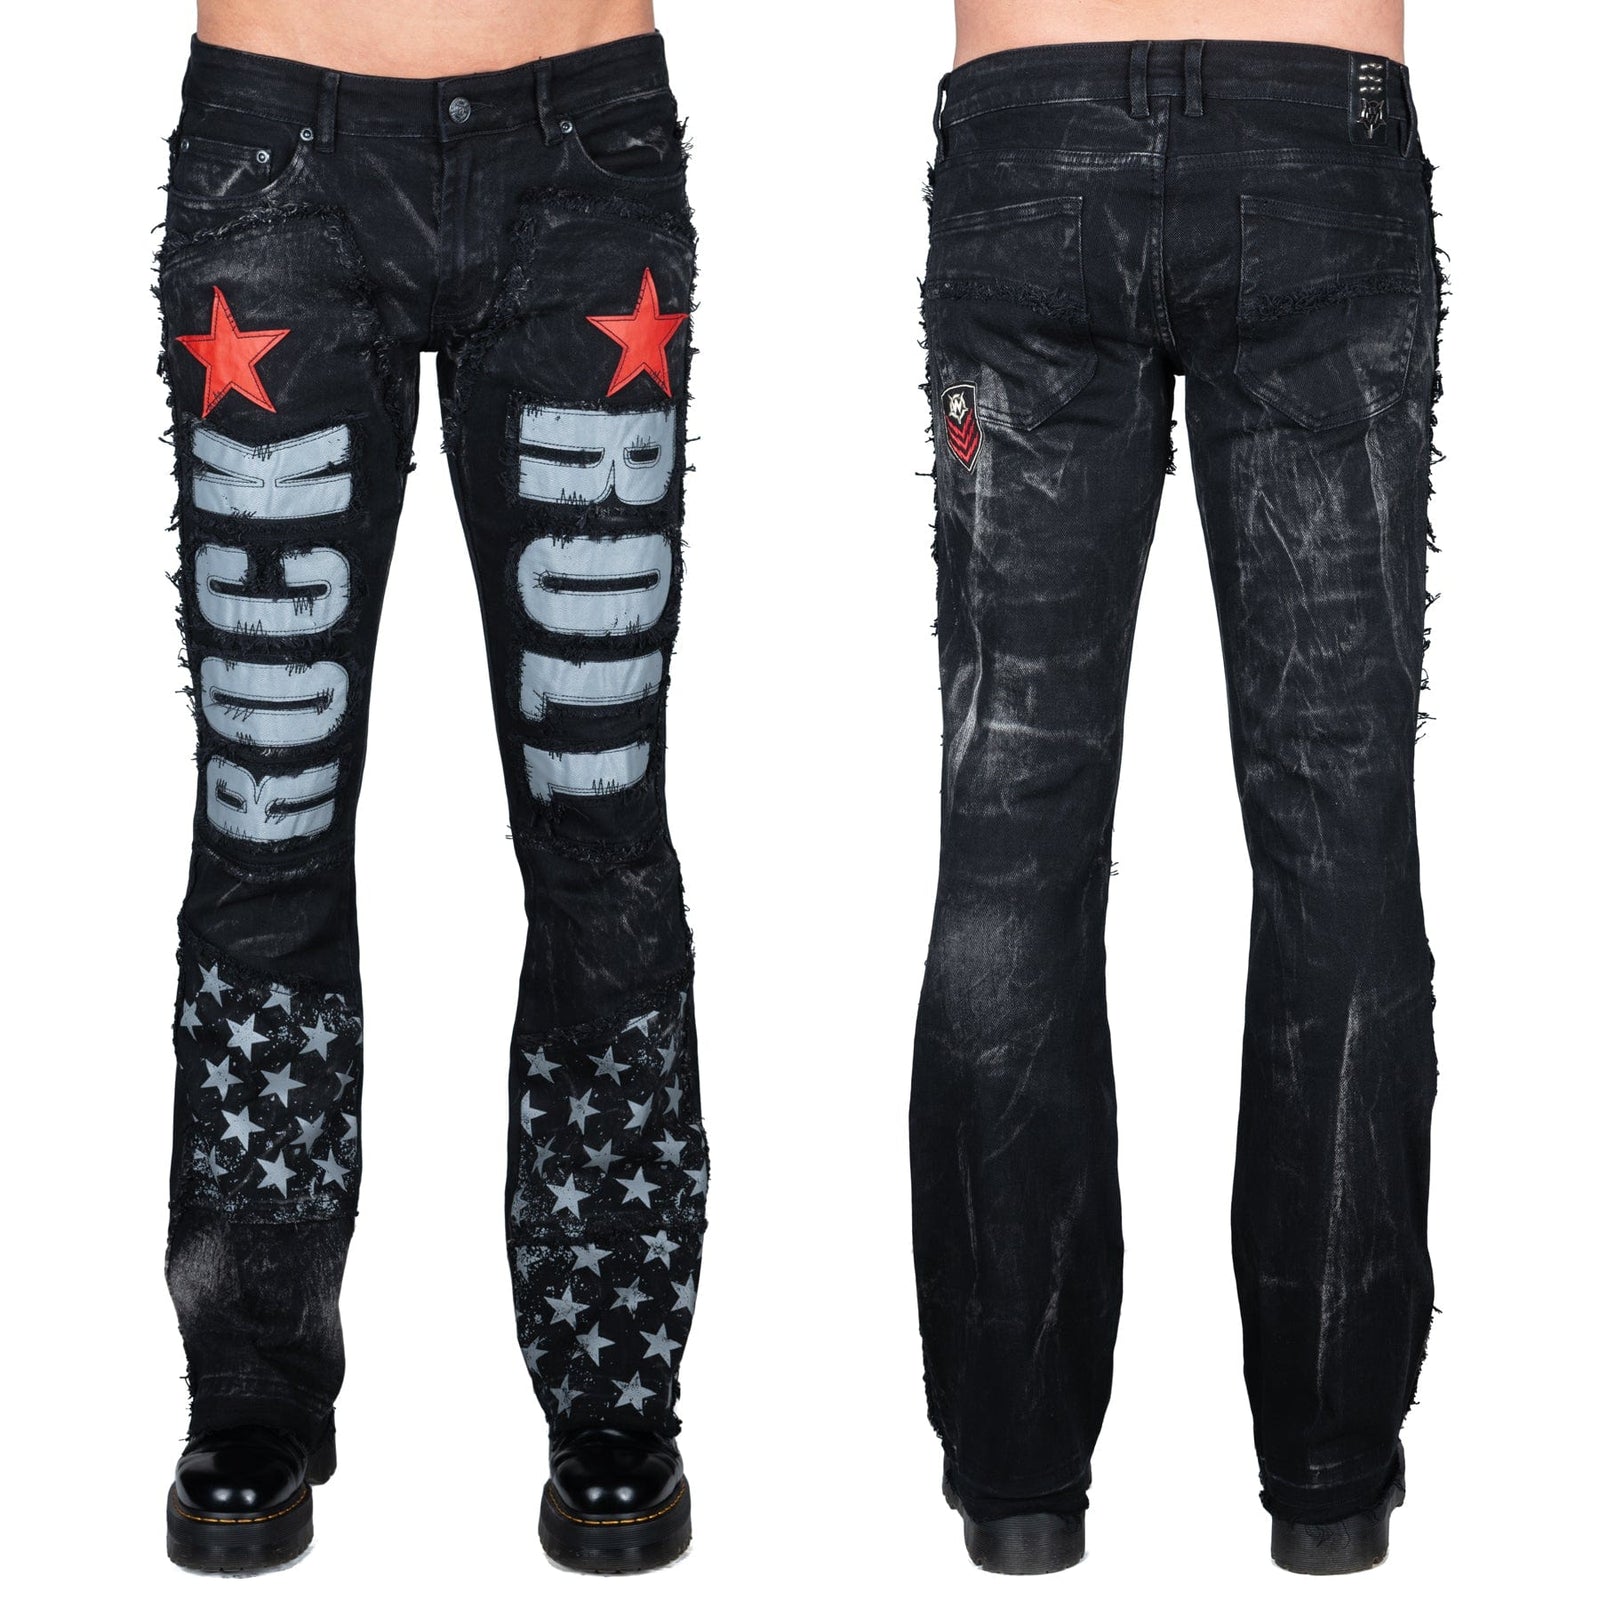 All Access Collection Pants Rock N Roll Star Jeans - Ready to ship - Size 32